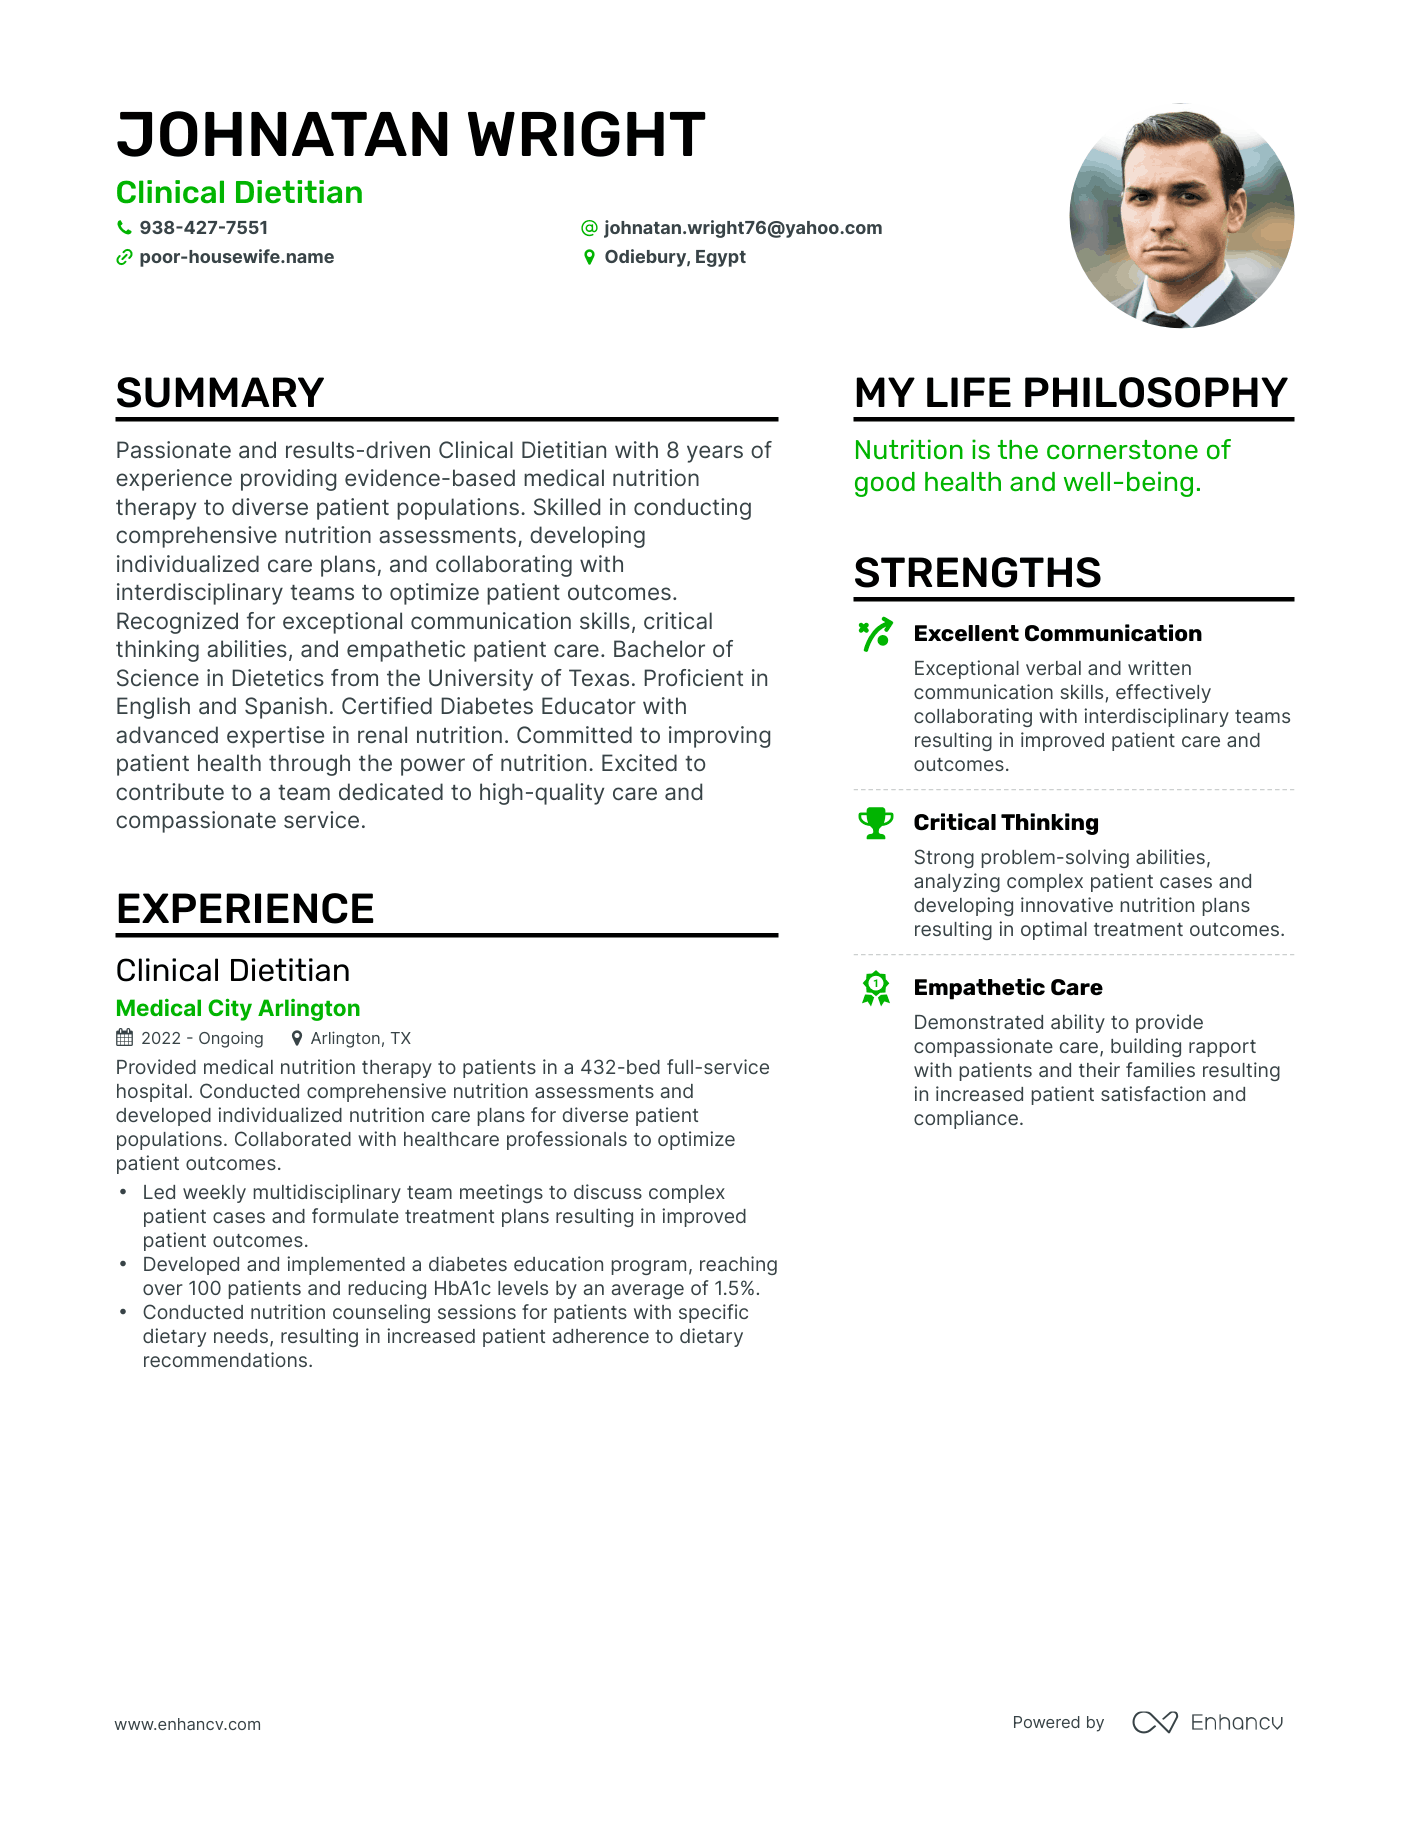 Clinical Dietitian resume example